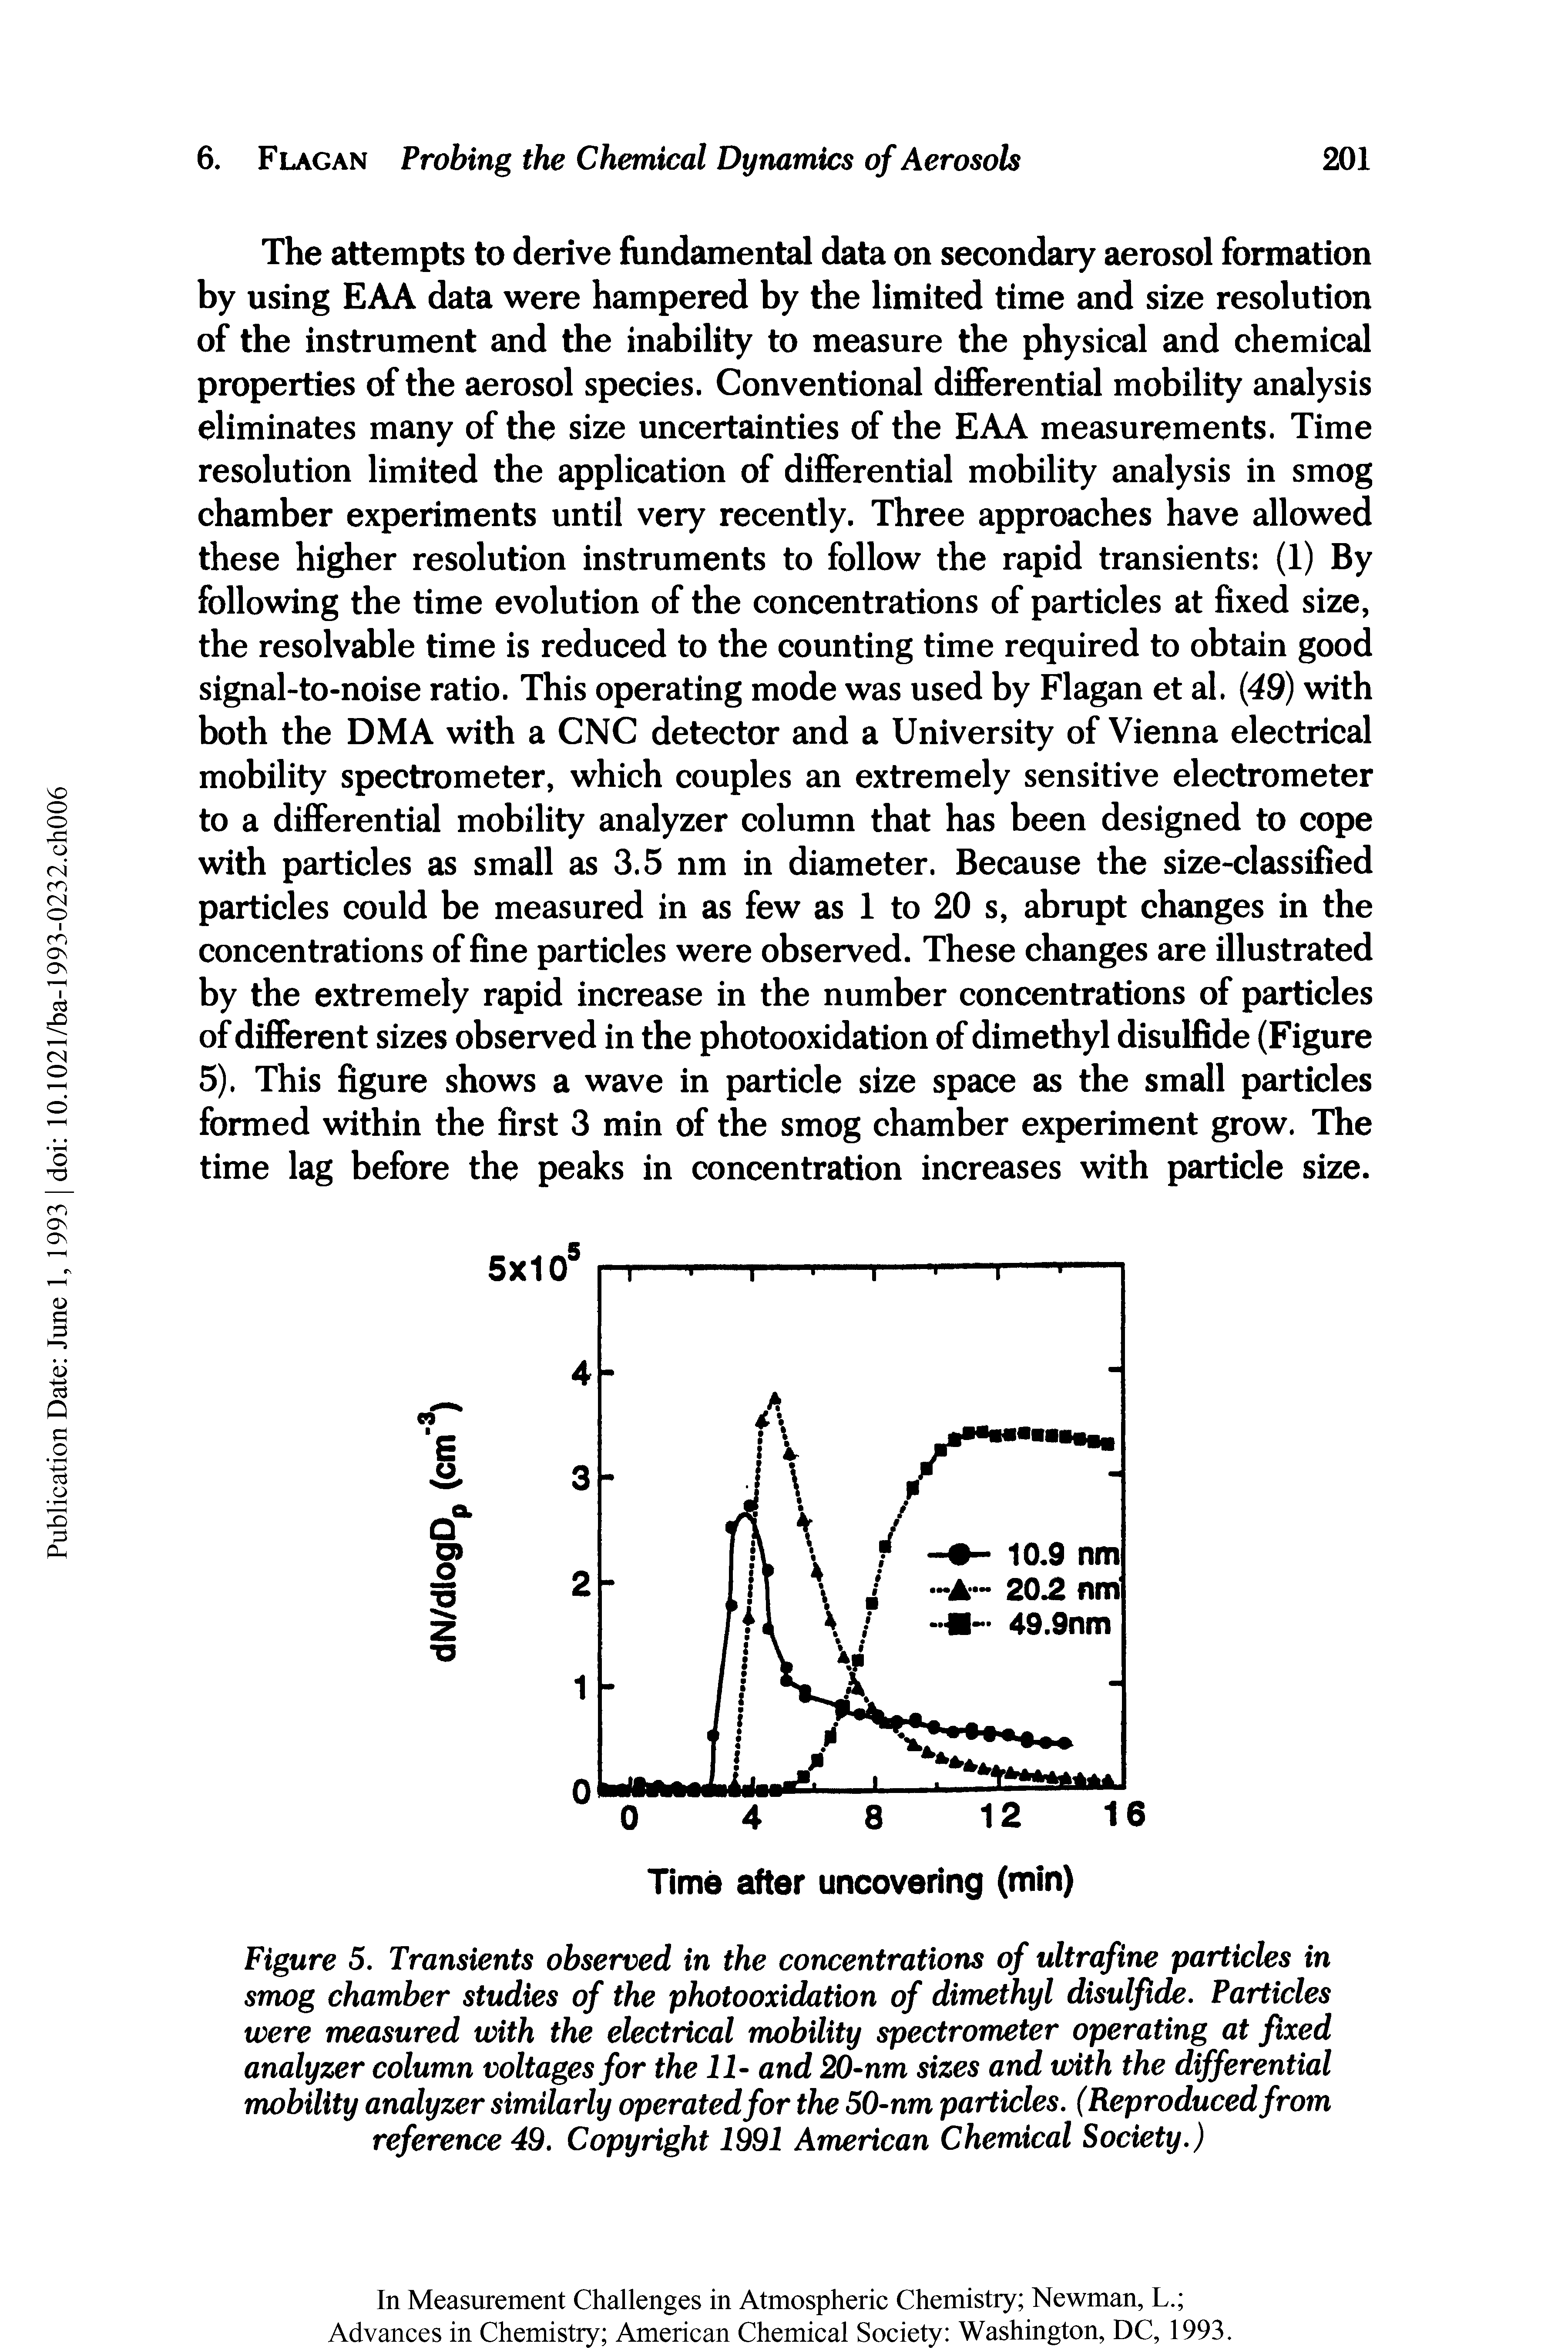 Figure 5. Transients observed in the concentrations of ultrafine particles in smog chamber studies of the photooxidation of dimethyl disulfide. Particles were measured with the electrical mobility spectrometer operating at fixed analyzer column voltages for the 11- and 20-nm sizes and with the differential mobility analyzer similarly operated for the 50-nm particles. (Reproduced from reference 49. Copyright 1991 American Chemical Society.)...